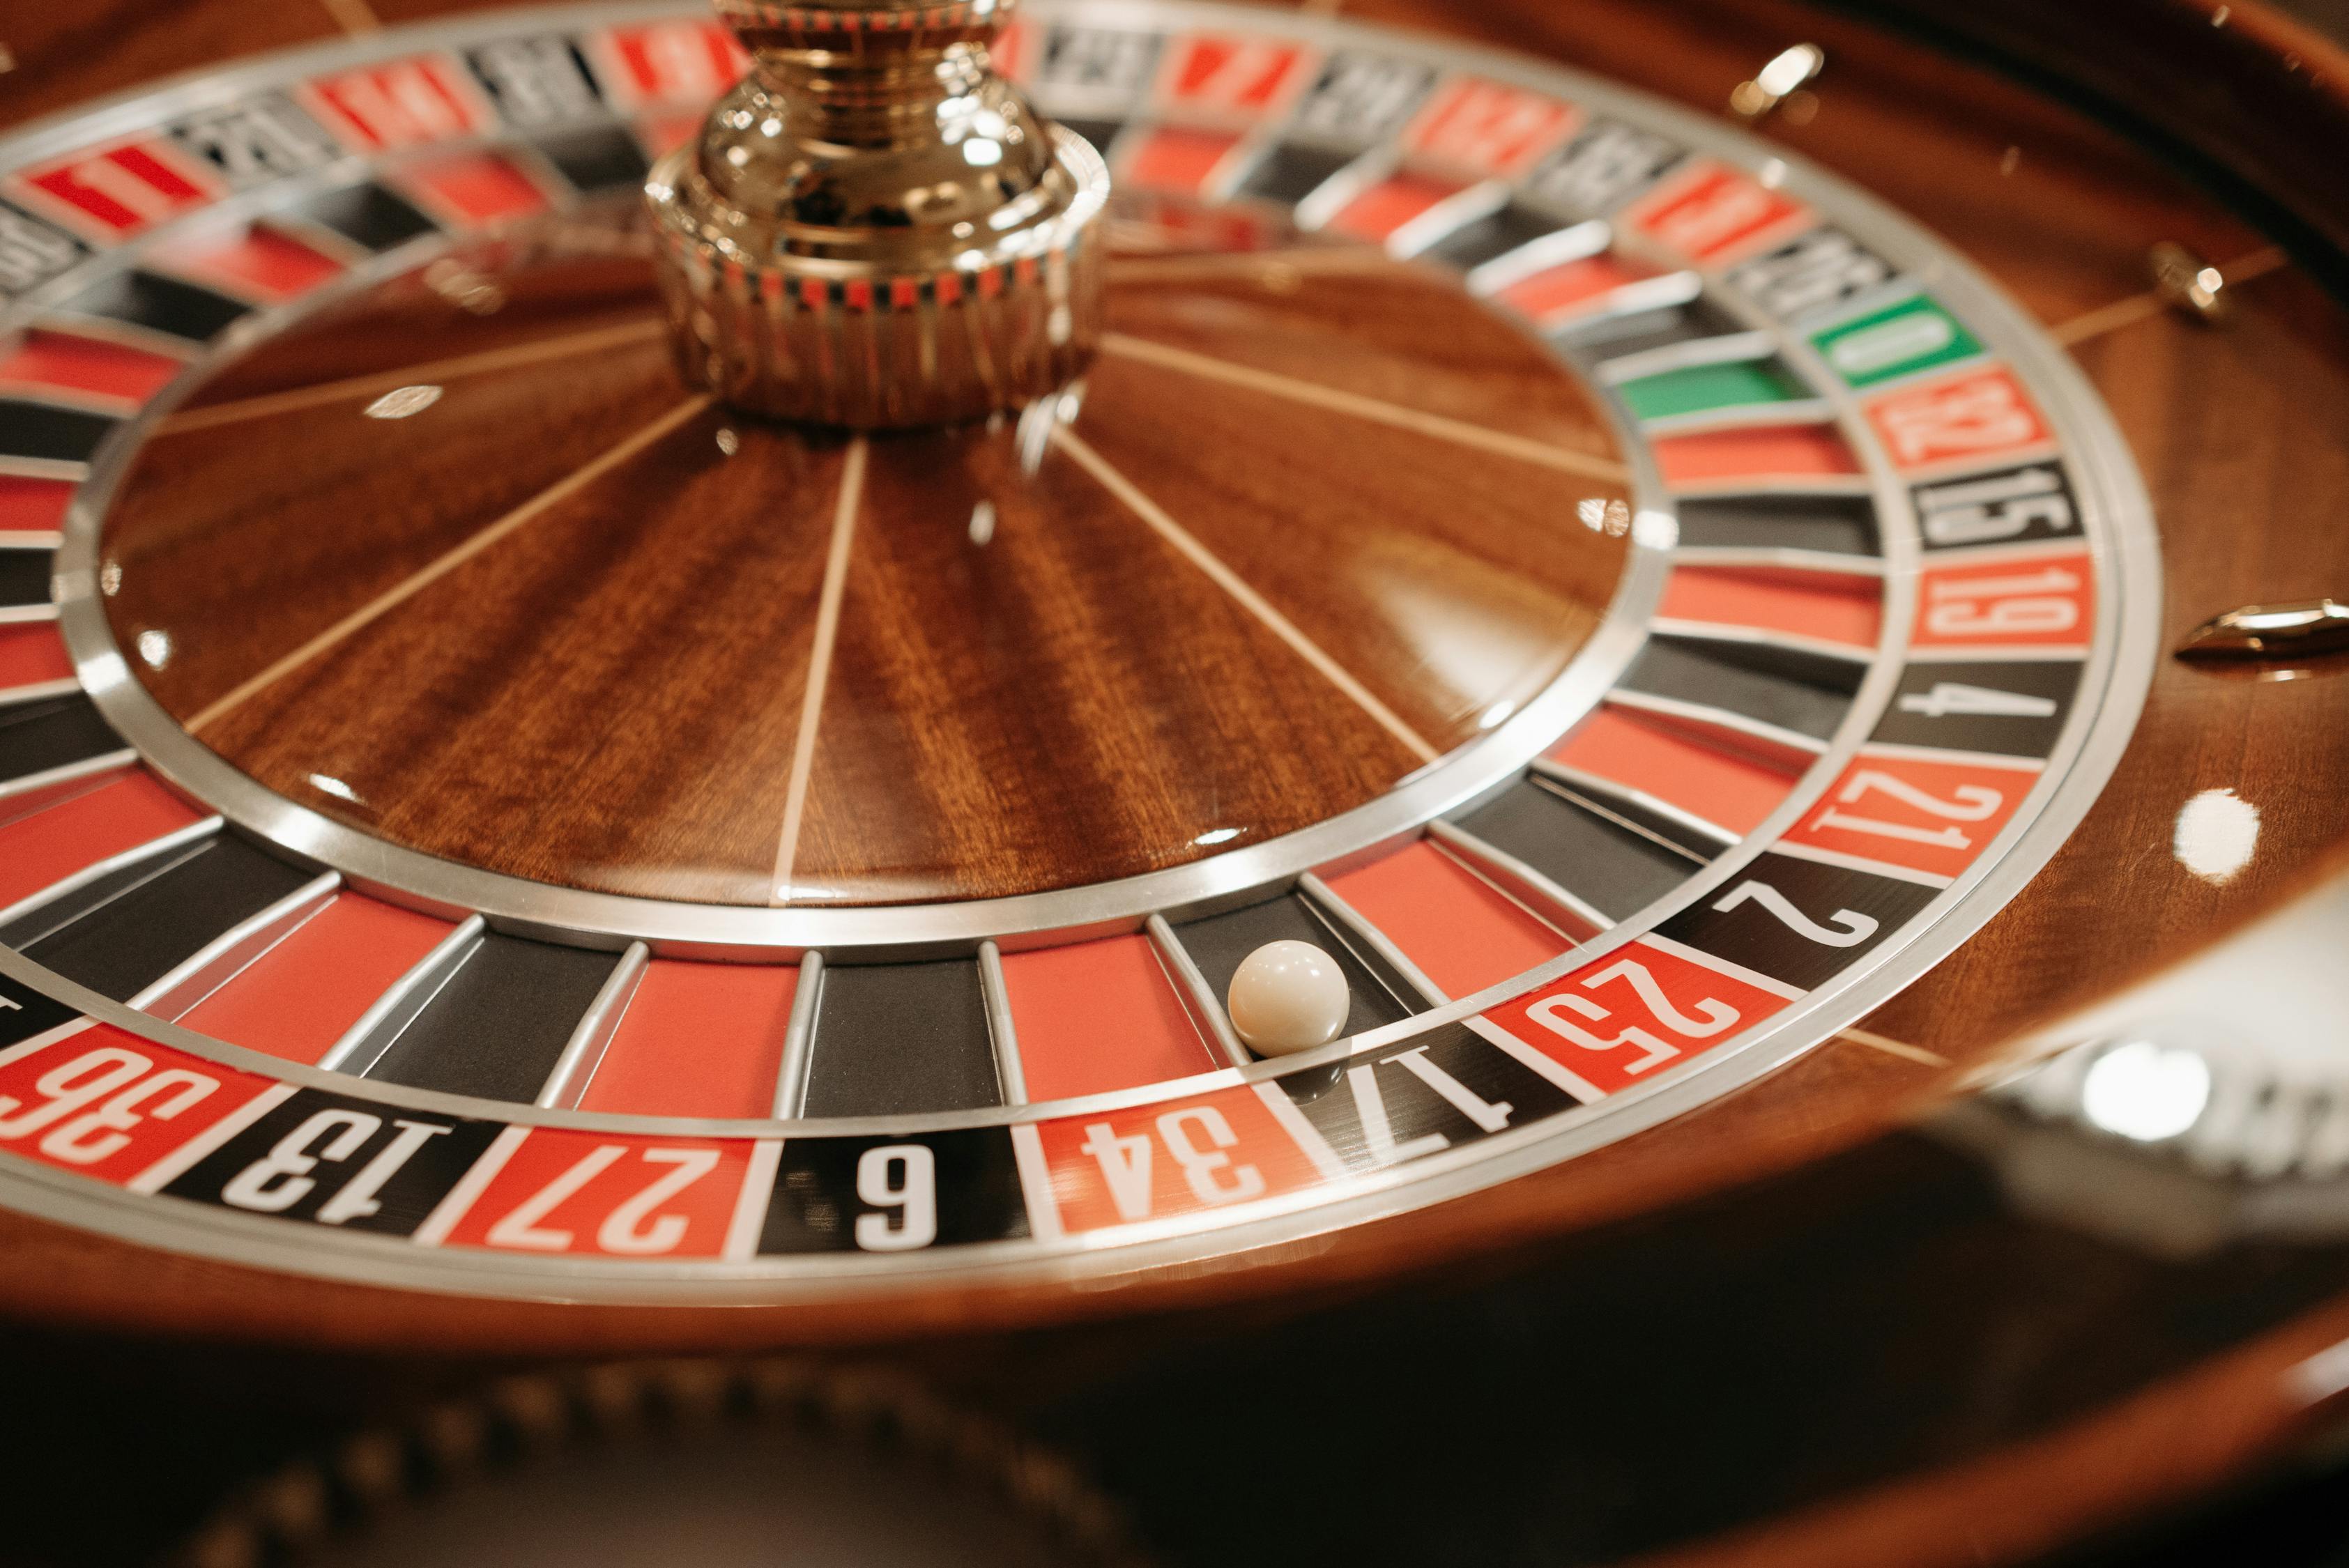 The best game in casinos to win money